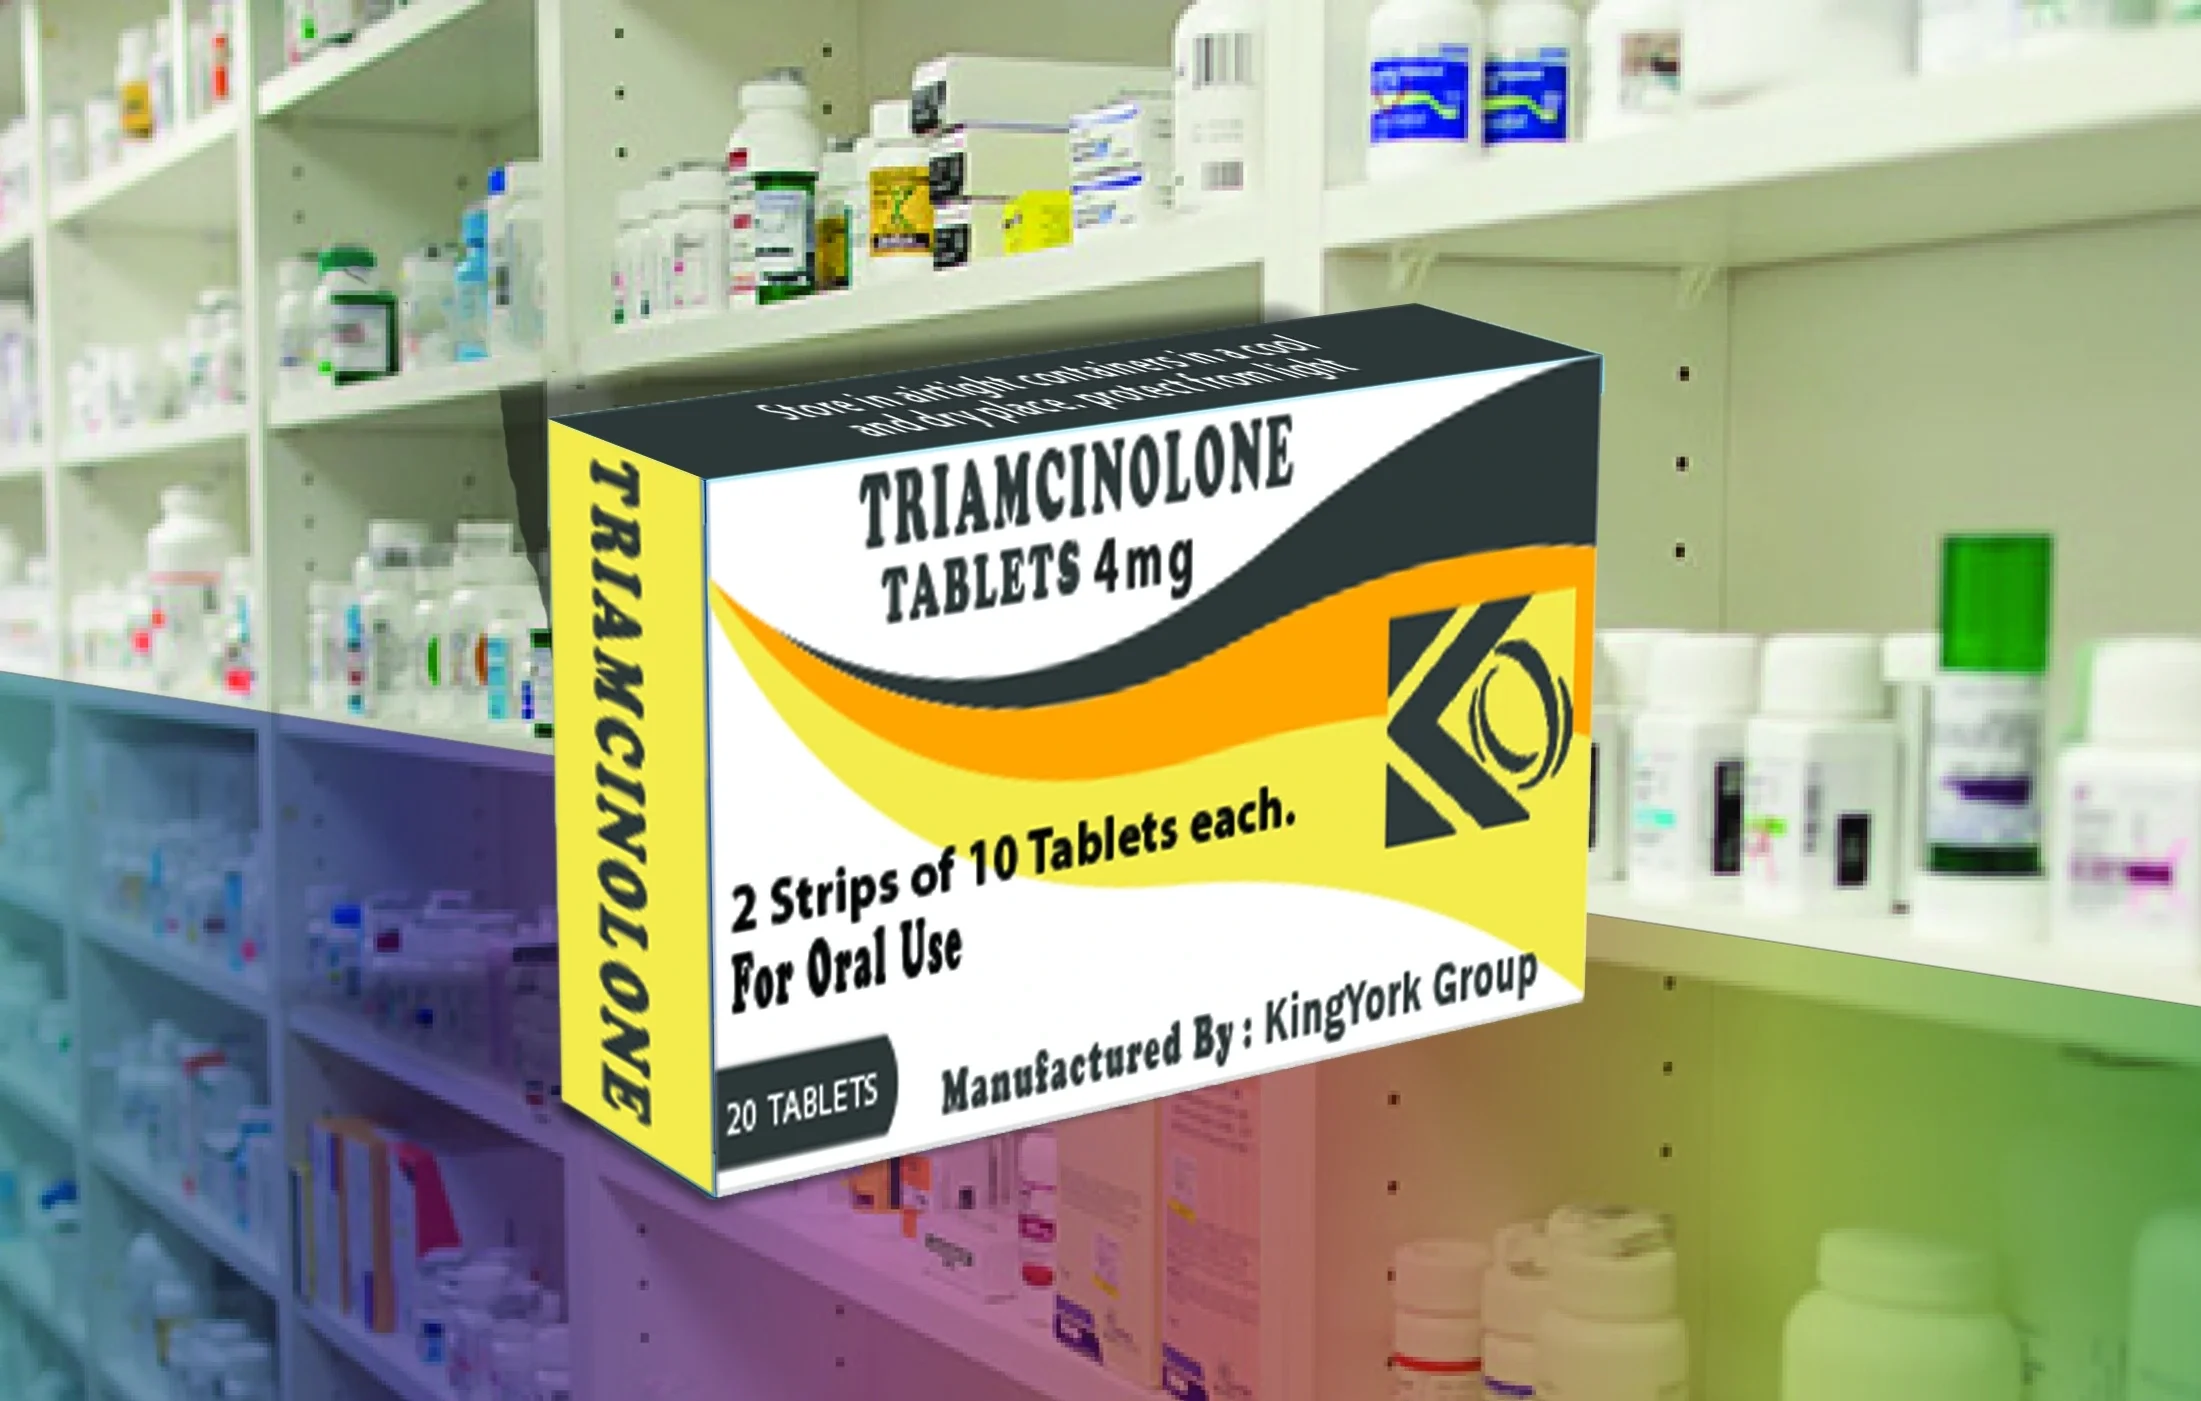 'triamcinolone tablets', 'analgesic tablets', 'corticosteroid tablets', 'steroid'